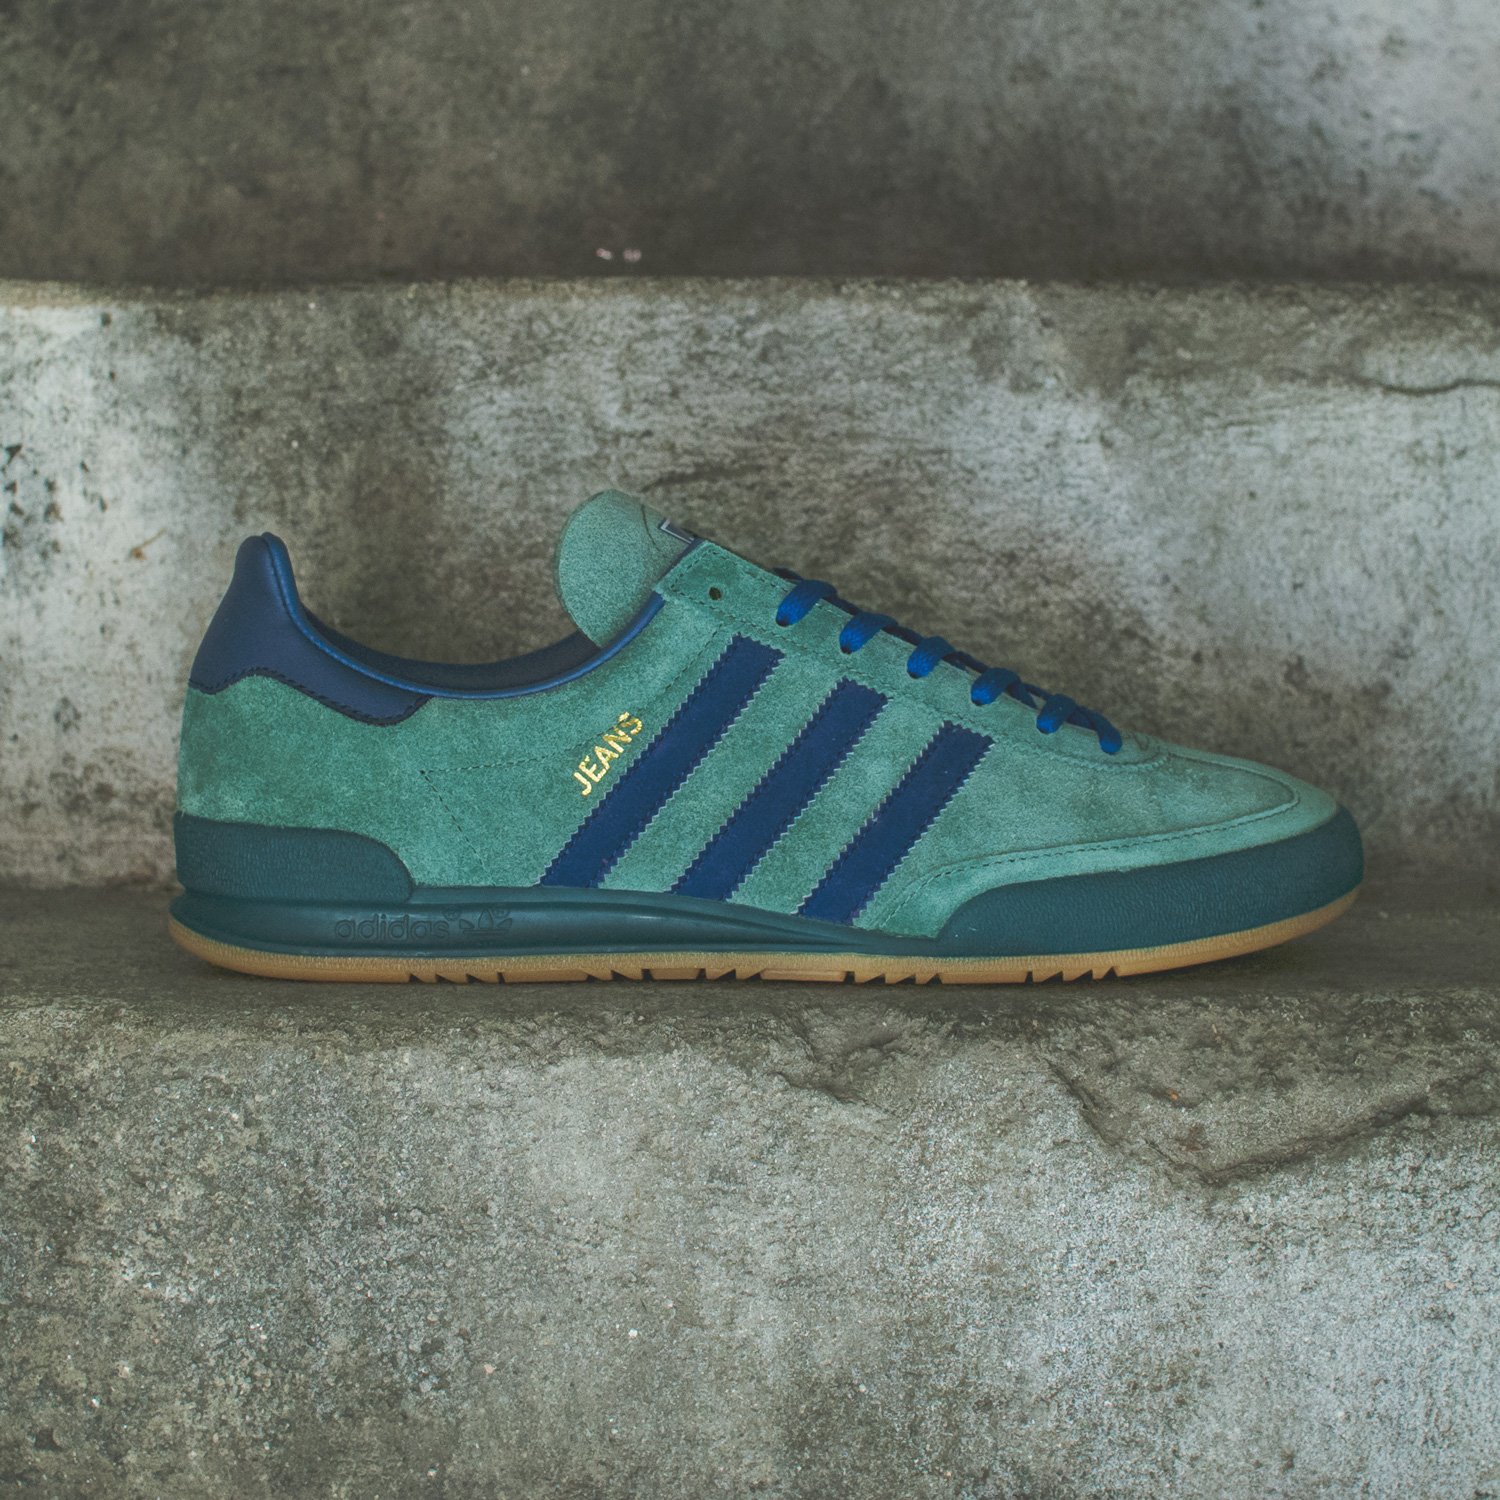 SNS on Twitter: "The adidas Originals Jeans MKII "Vista Green" is now  available at SNS! https://t.co/UoDvAlOqjj https://t.co/wE7b5Hh7FJ" / Twitter